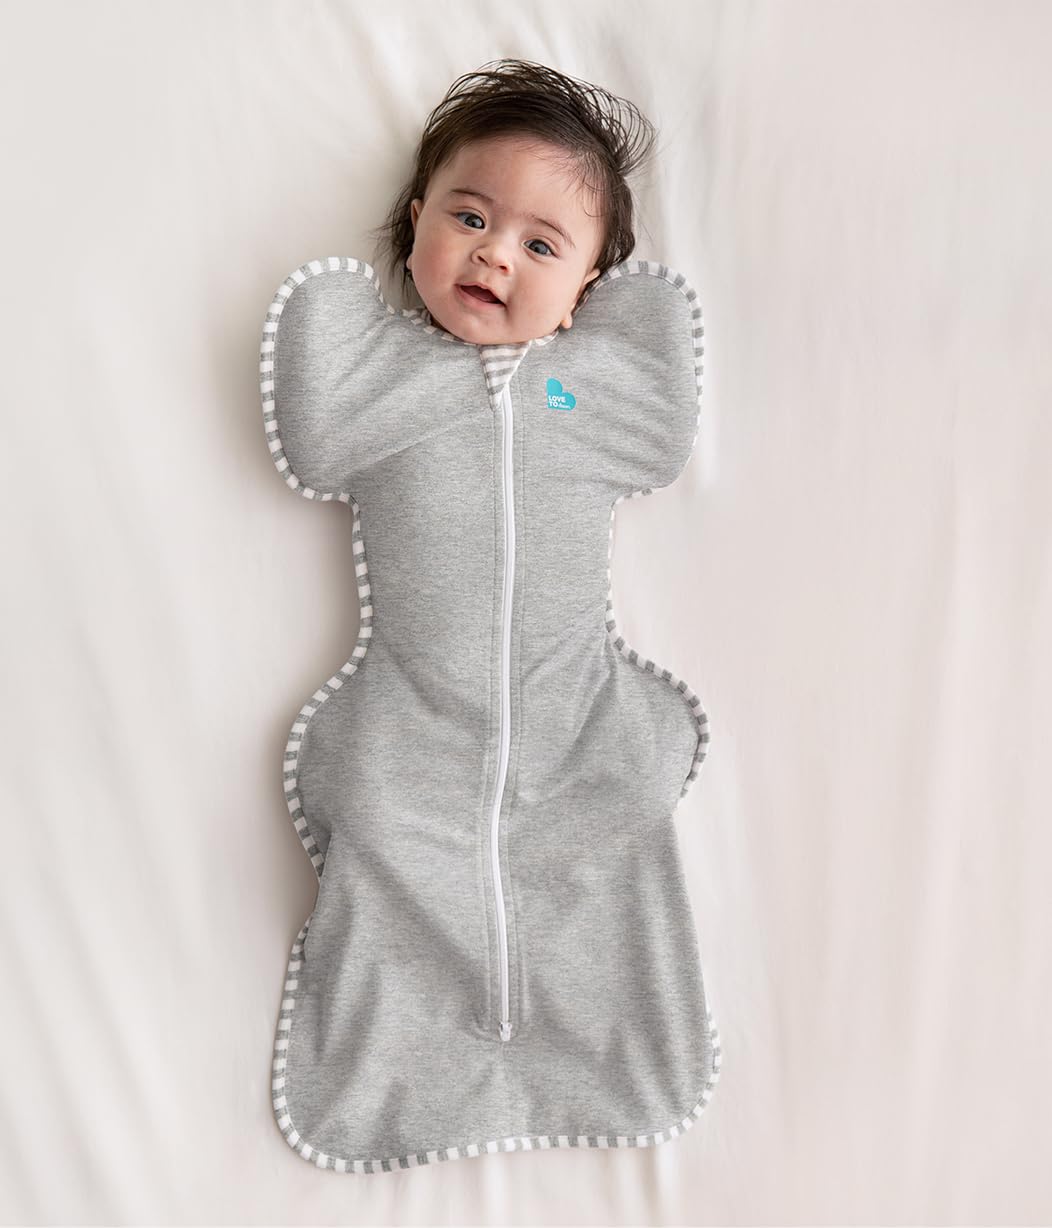 Love to Dream Swaddle UP, Baby Sleep Sack, Self-Soothing Swaddles for Newborns, Improves Sleep, Snug Fit Helps Calm Startle Reflex, New Born Essentials for Baby, 13-19 lbs, Grey